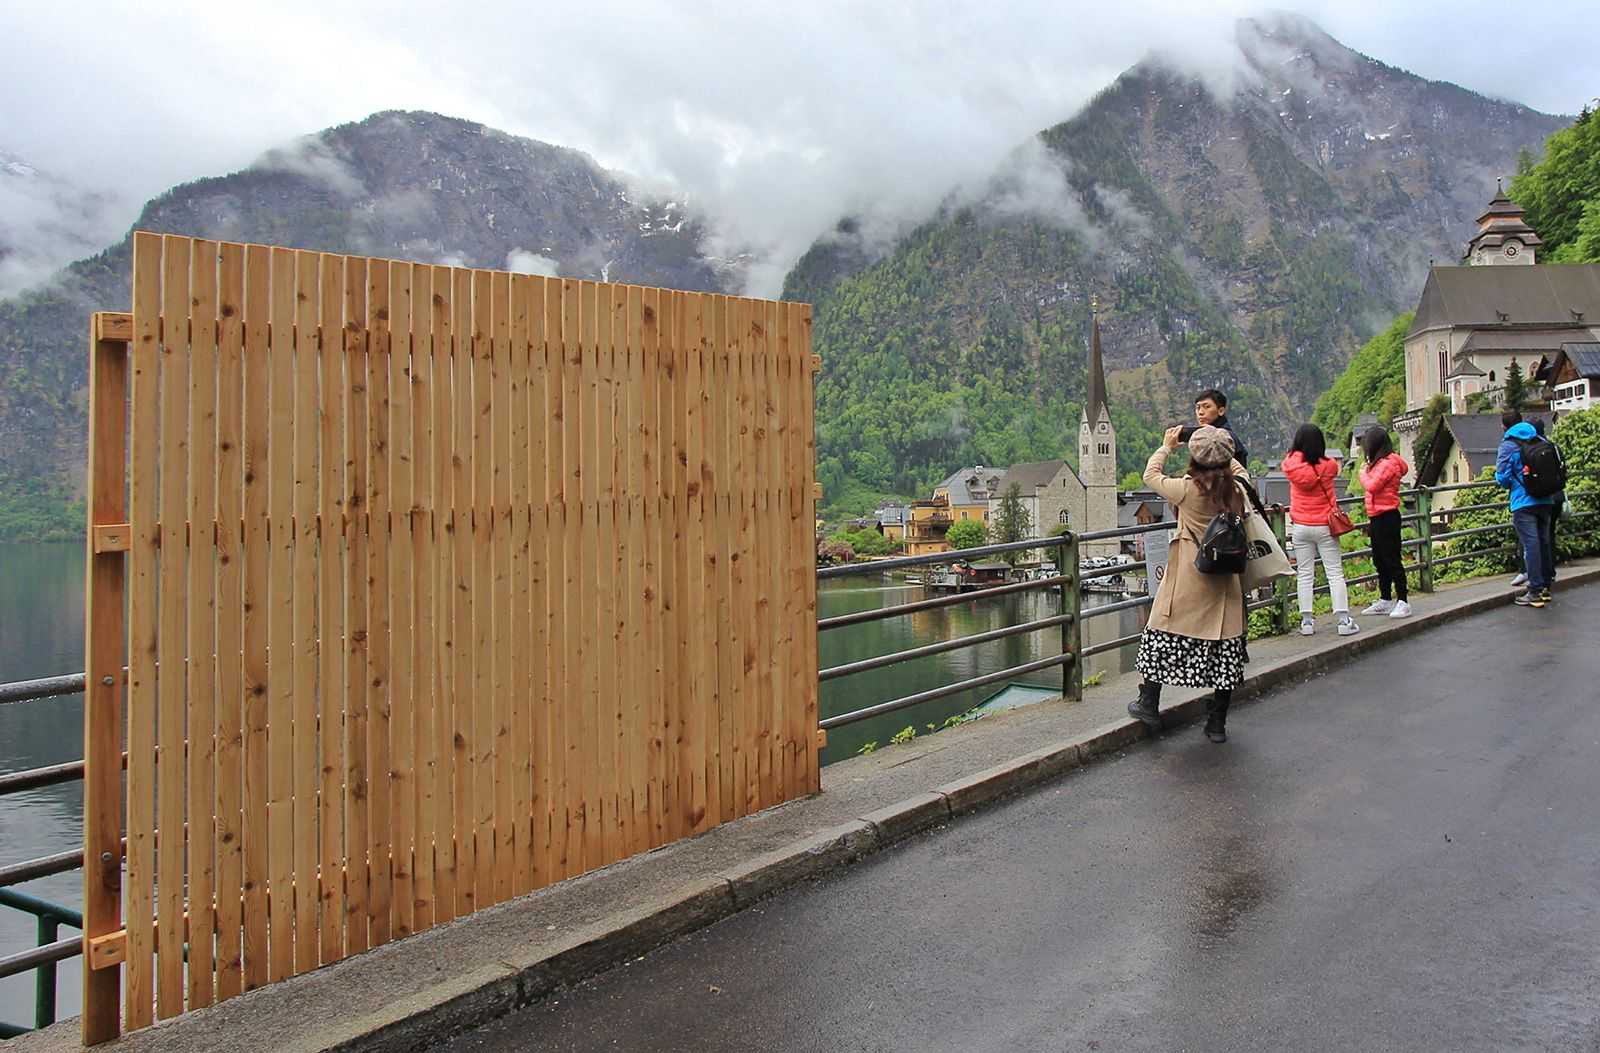 Tourist hot spot erects fence to deter selfie&takers, control over&tourism